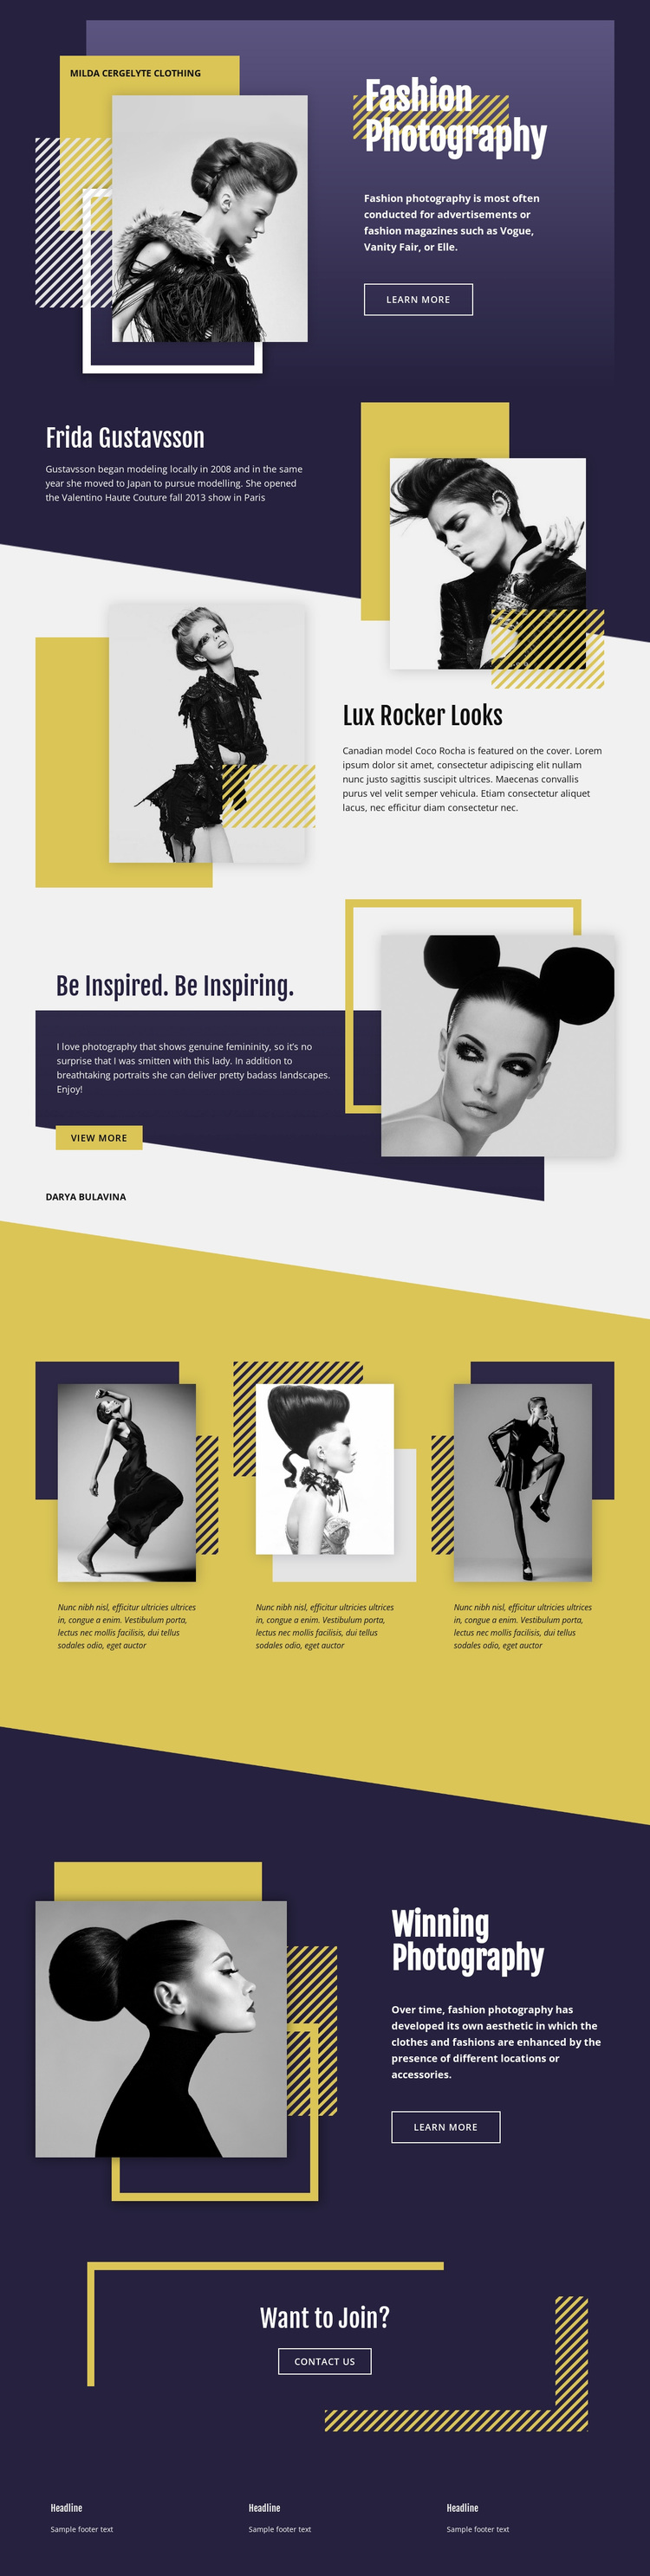 Fashion Photography Overlapping Website Design